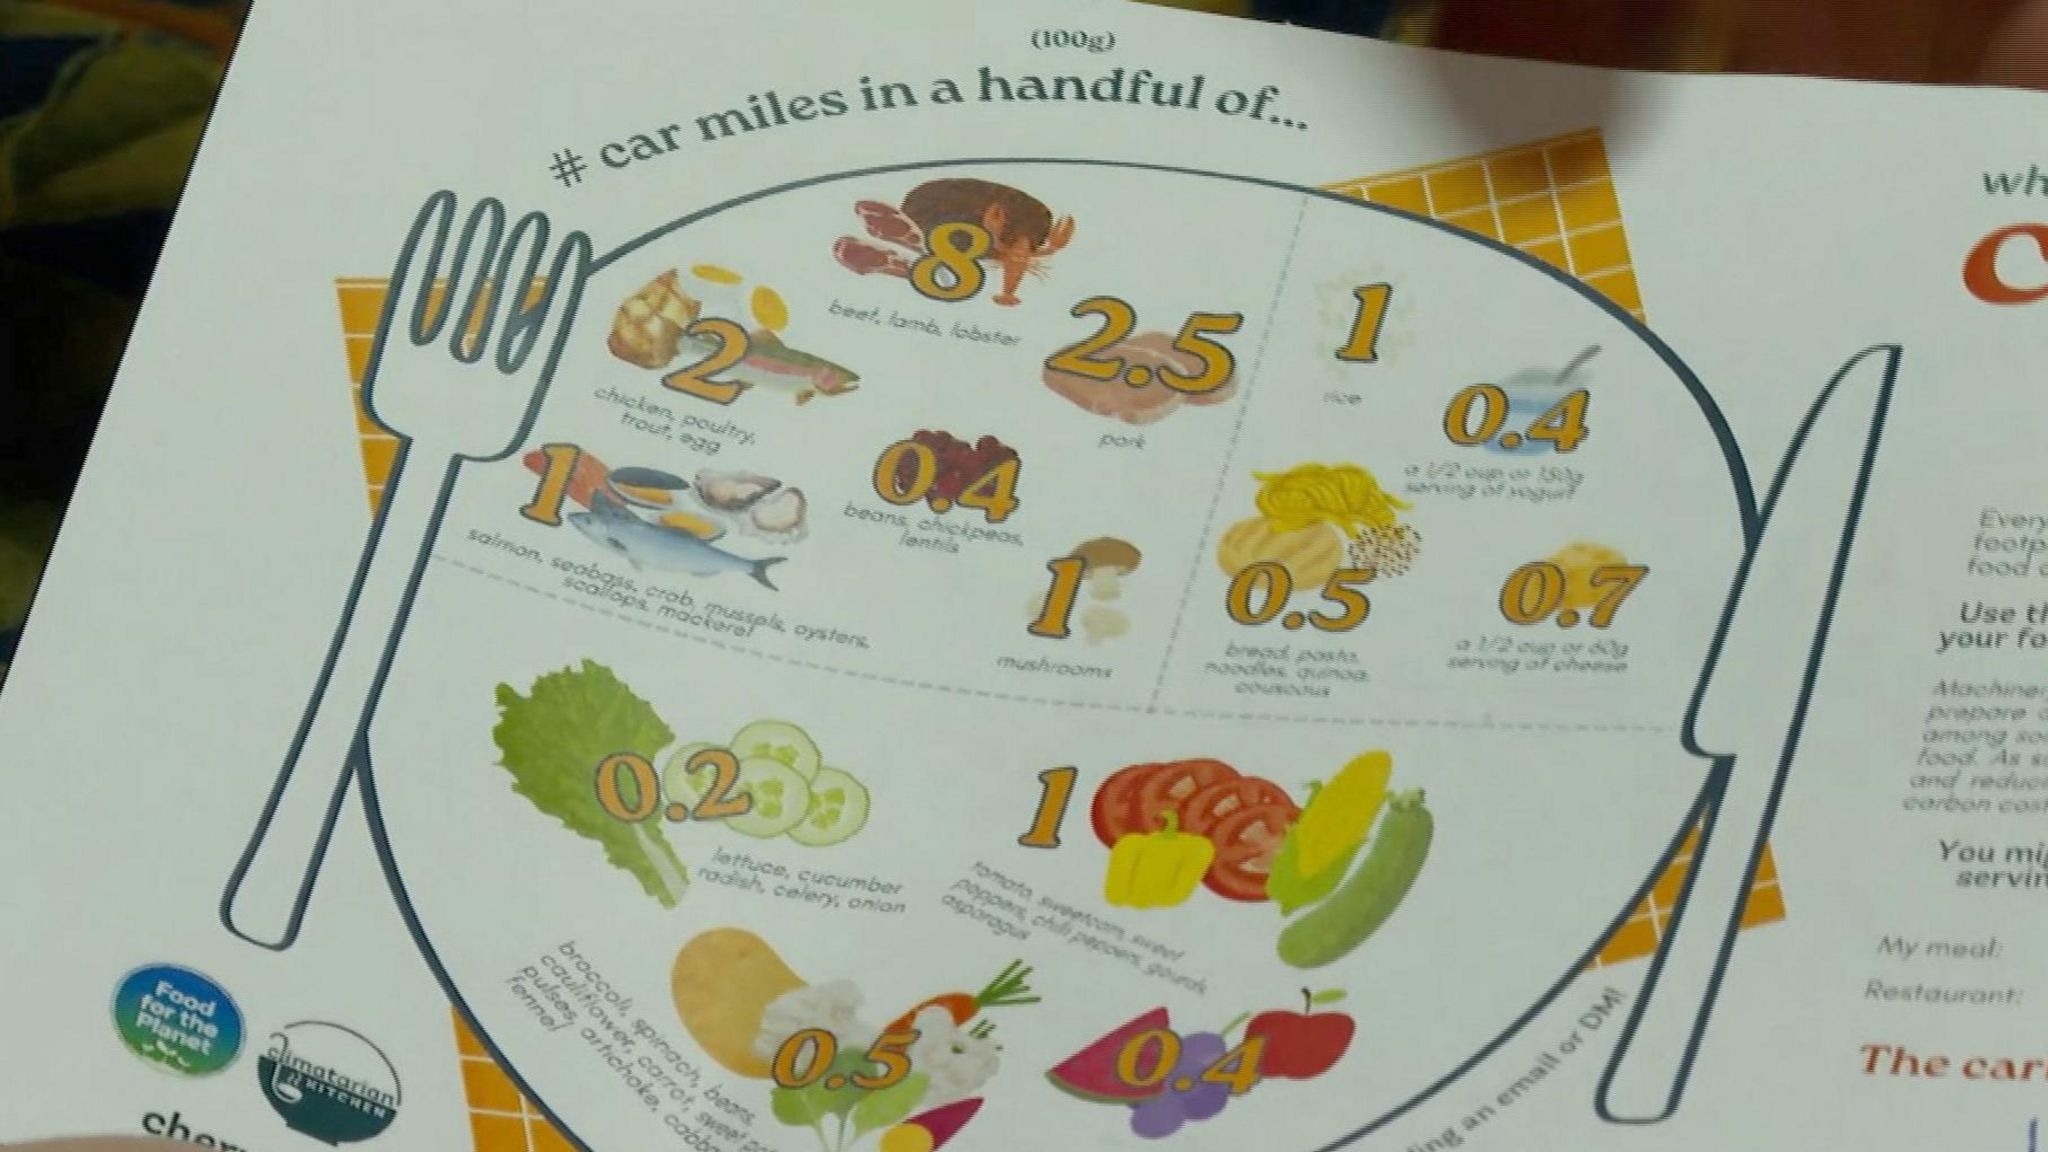 A chart showing car miles of foods